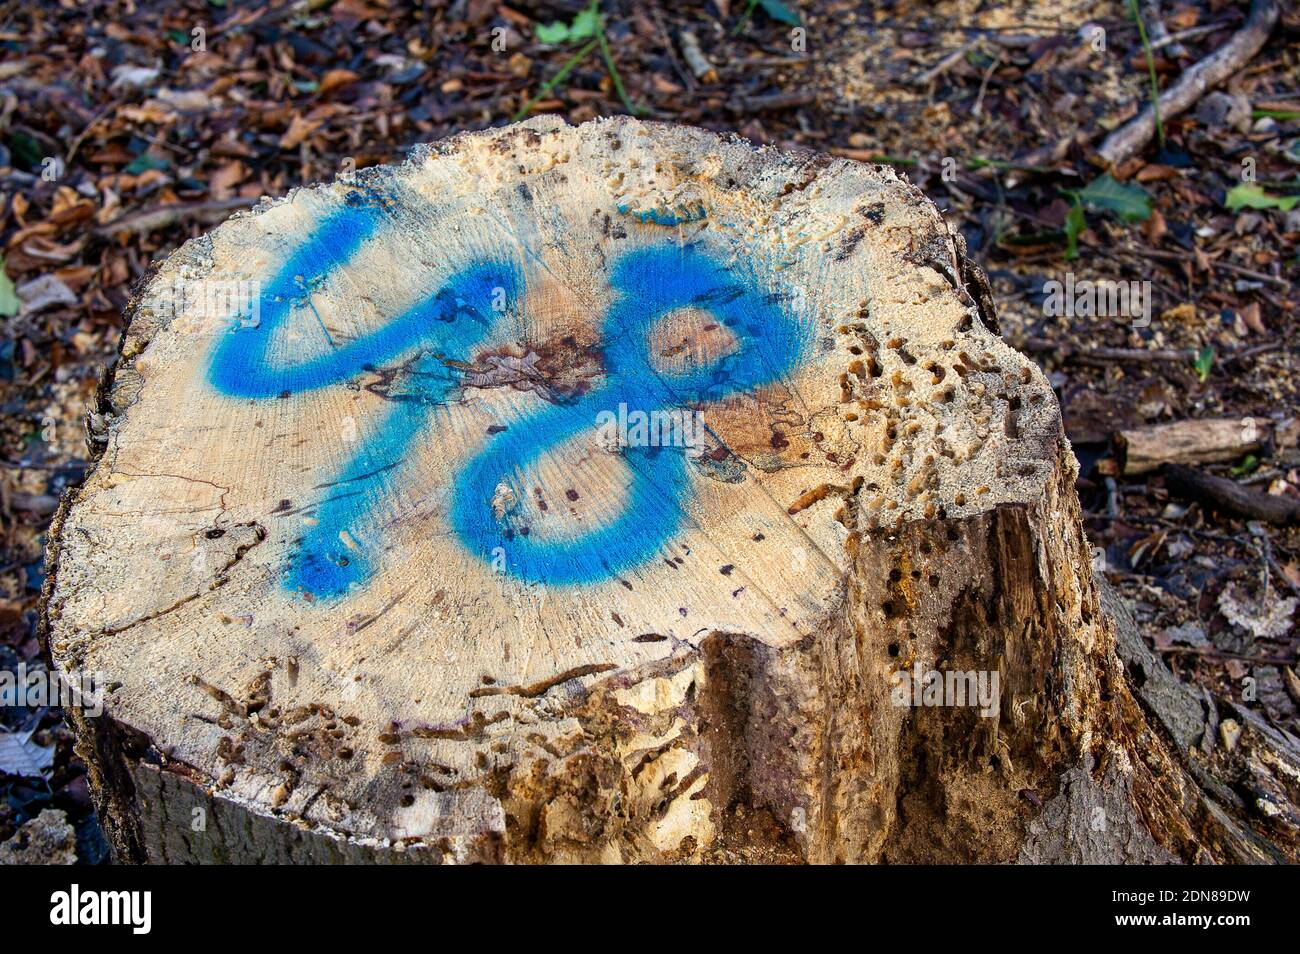 Aylesbury Vale, Buckinghamshire, UK. 17th December, 2020. The sad sight of tree stumps are all that remain of part of the Scheduled Monument of Grim's Ditch following their destruction by HS2. Locals and environmentalists are furious about this loss of woodland and wildlife habitat. The hugely controversial HS2 High Speed Rail from London to Birmingham link puts 108 ancient woodlands, 33 SSSIs and 693 wildlife areas at risk. Credit: Maureen McLean Stock Photo